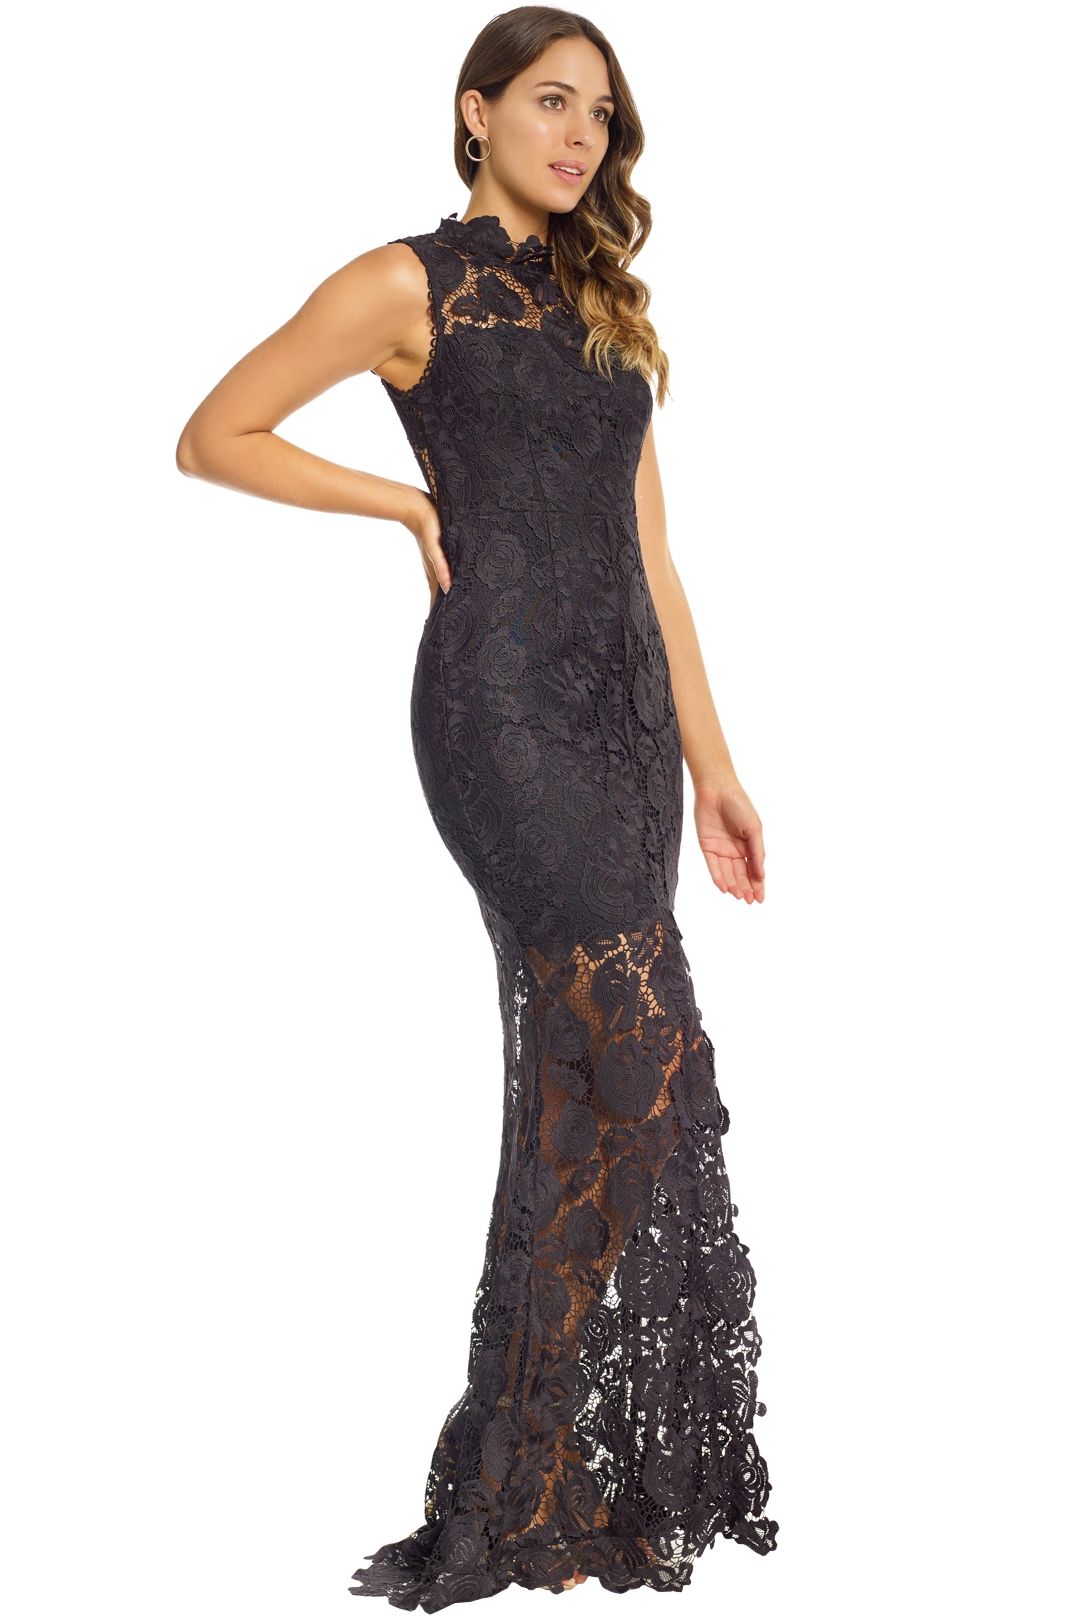 Grace and Hart - Espresso Gown - Black - Side